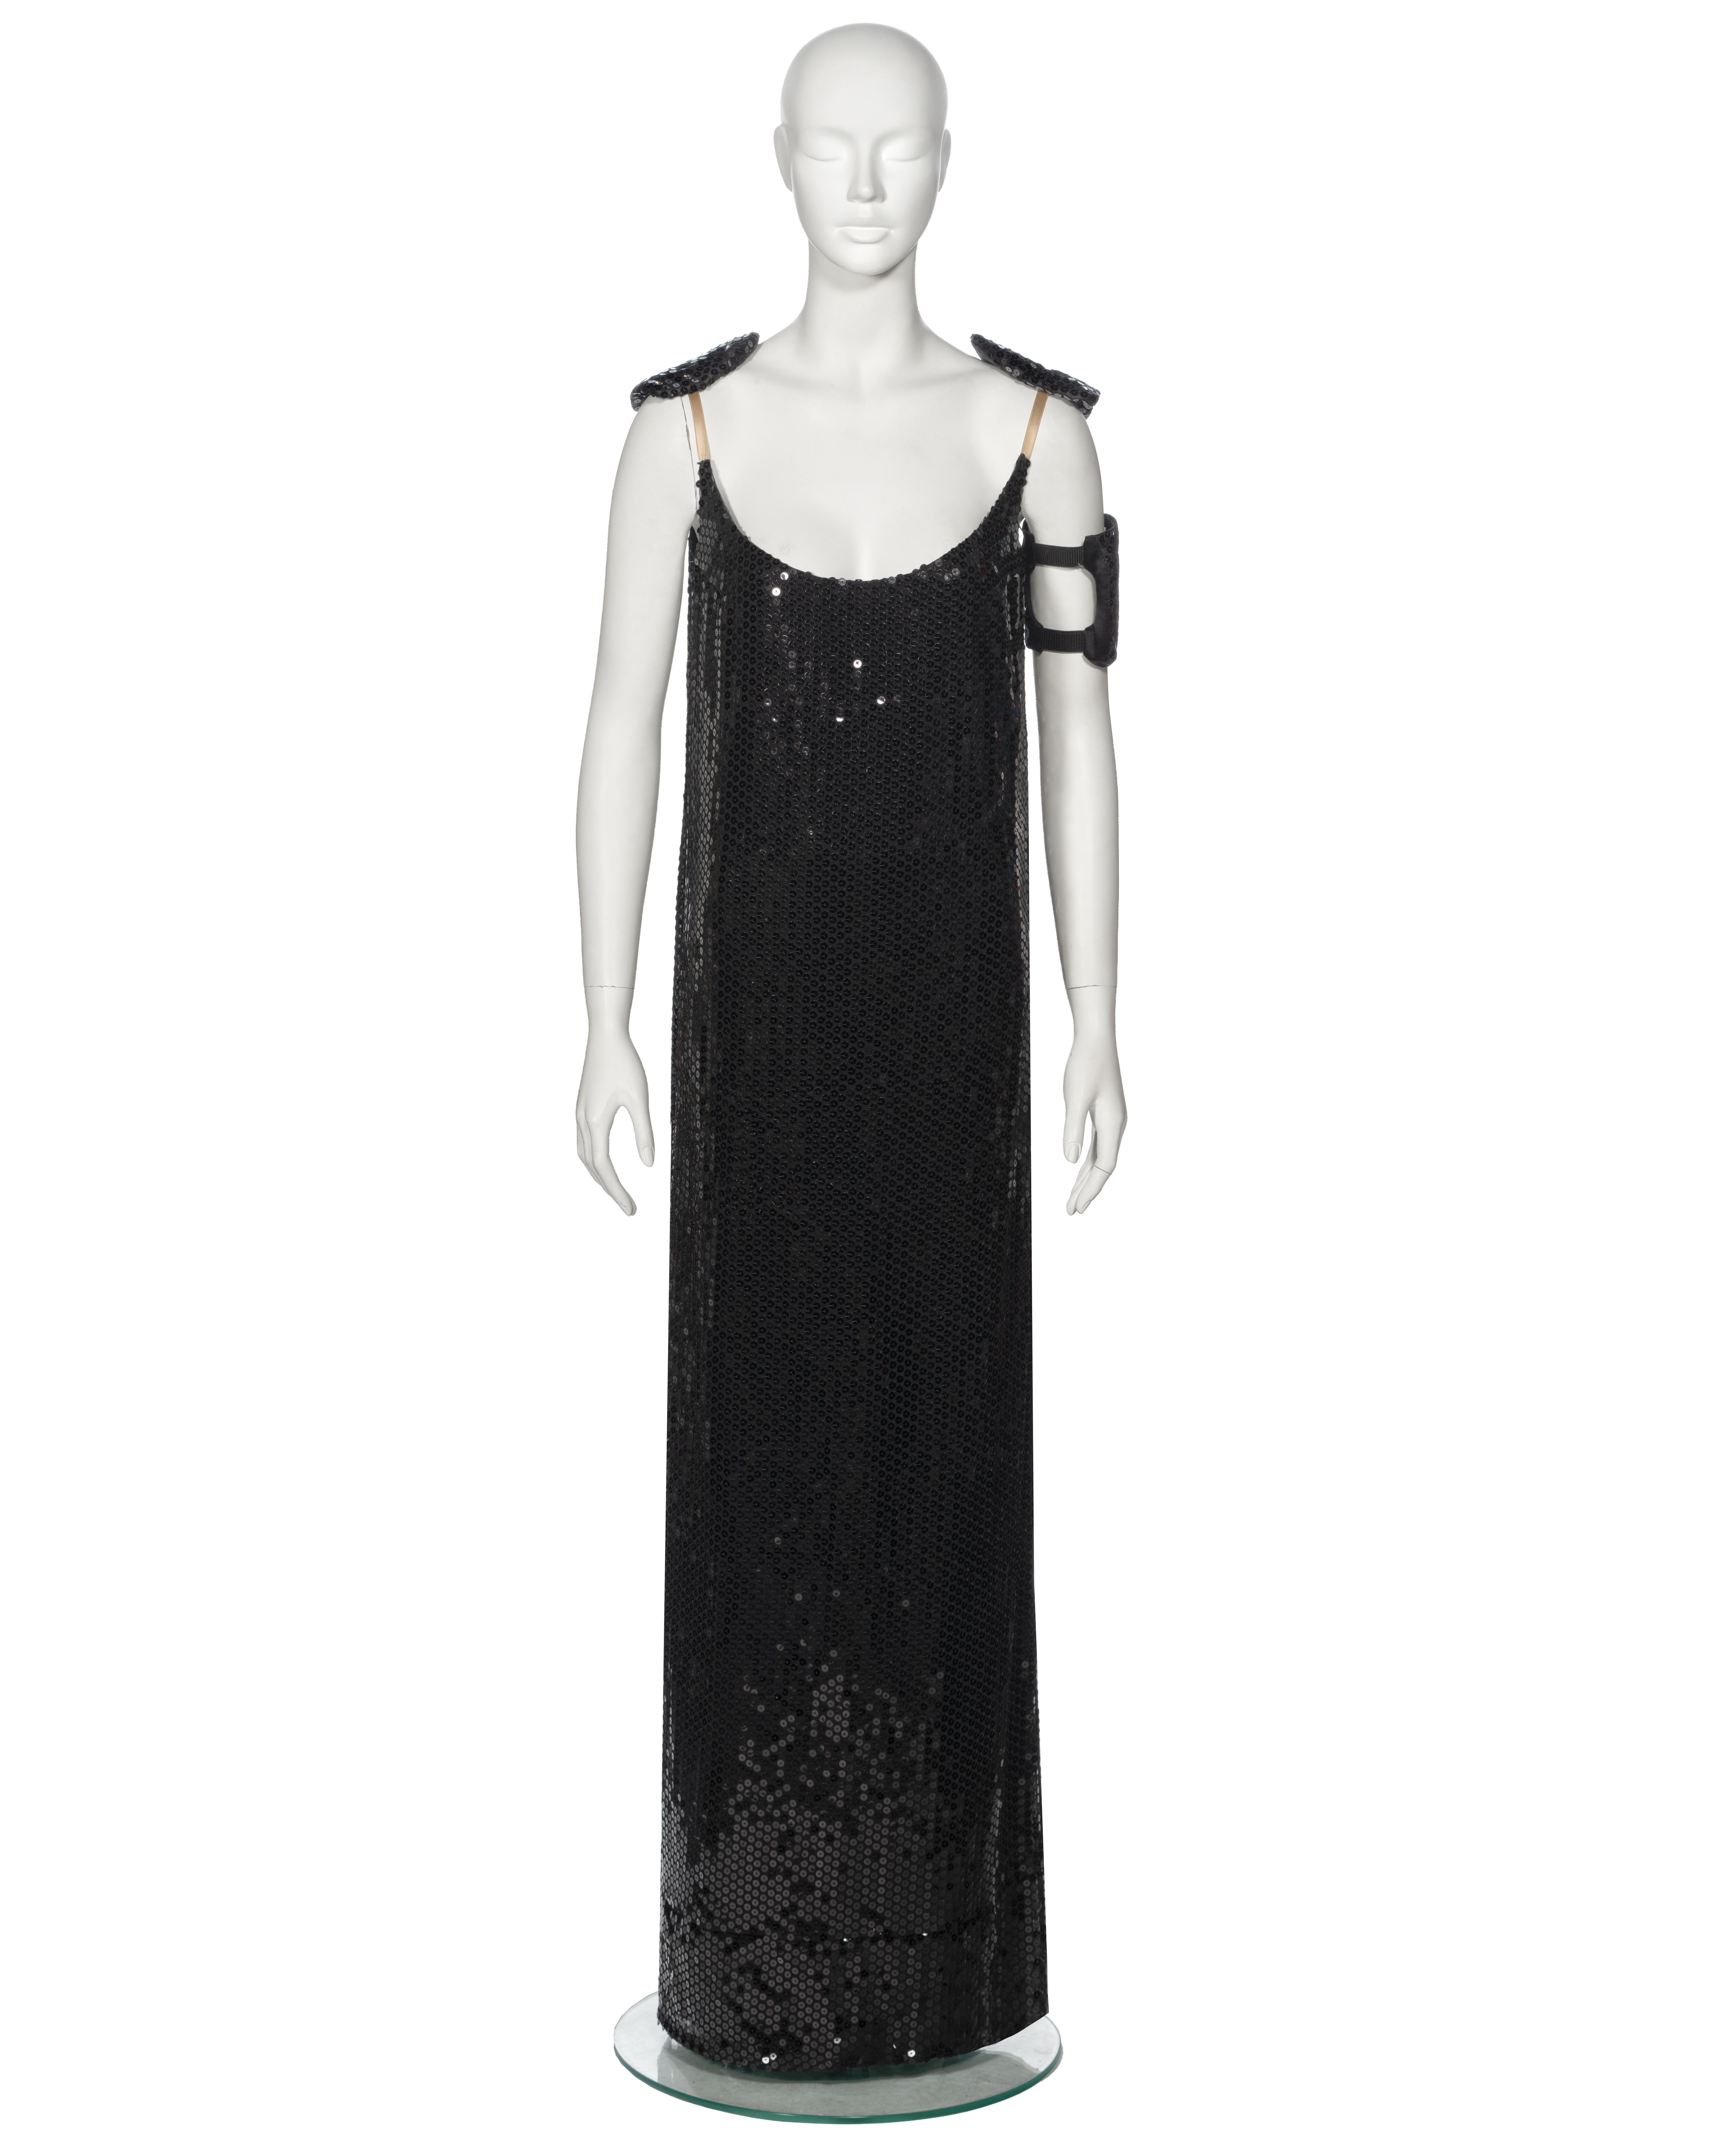 ▪ Archival Helmut Lang Evening Dress 
▪ Fall-Winter 1999
▪ Sold by One of a Kind Archive
▪ Museum Grade 
▪ Crafted from black sequin fabric 
▪ Features a straight cut, full-length design that falls to the floor
▪ Designed with a deep scoop